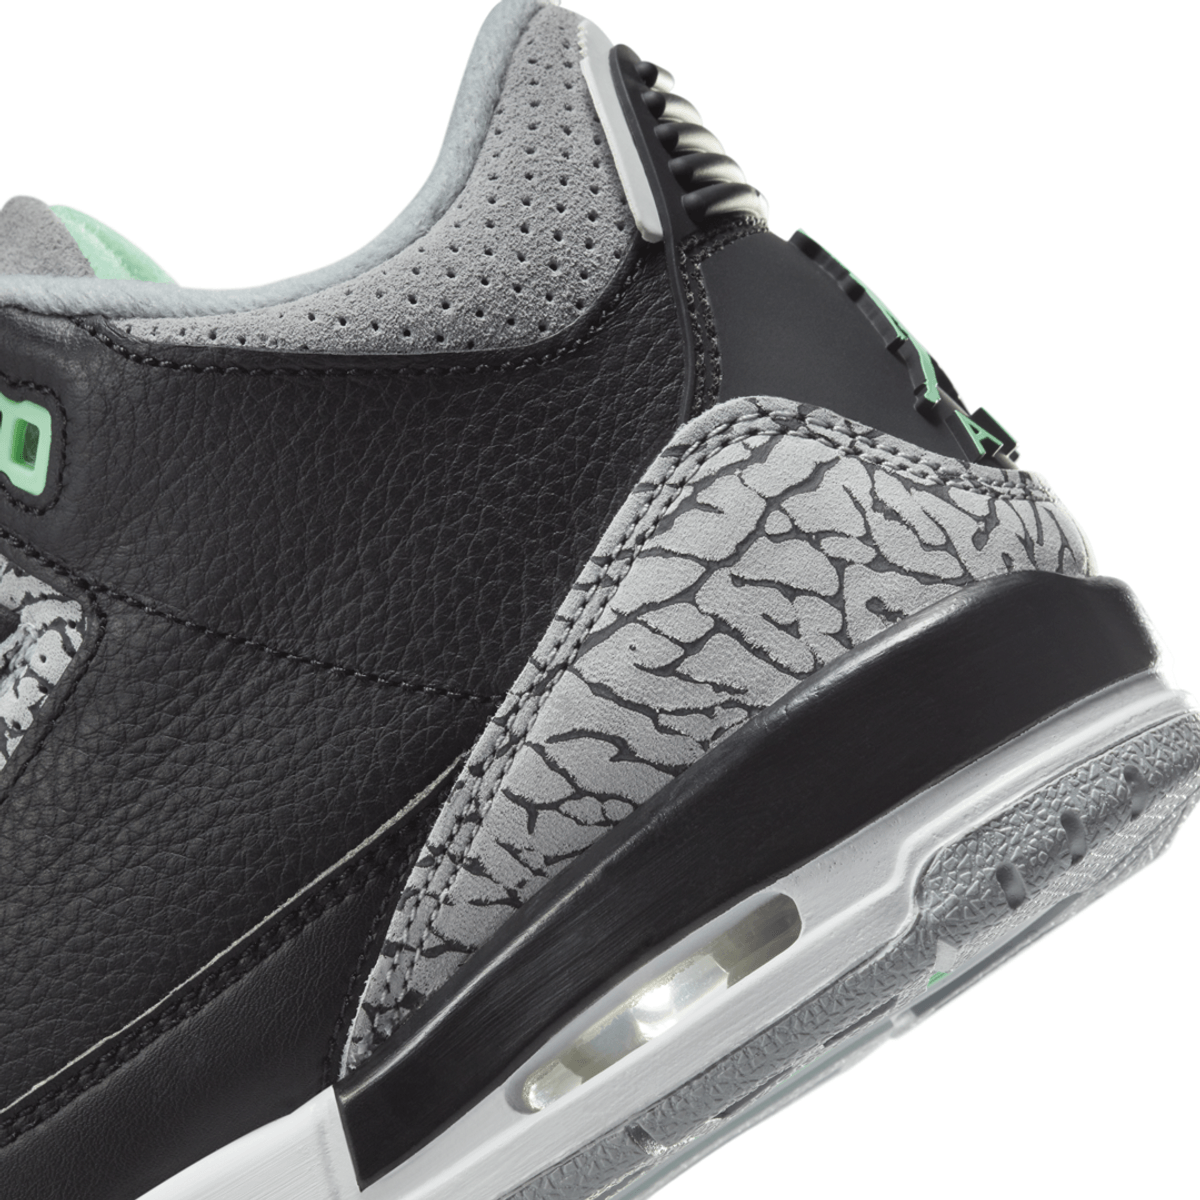 Official Images Of The Air Jordan 3 “Green Glow”